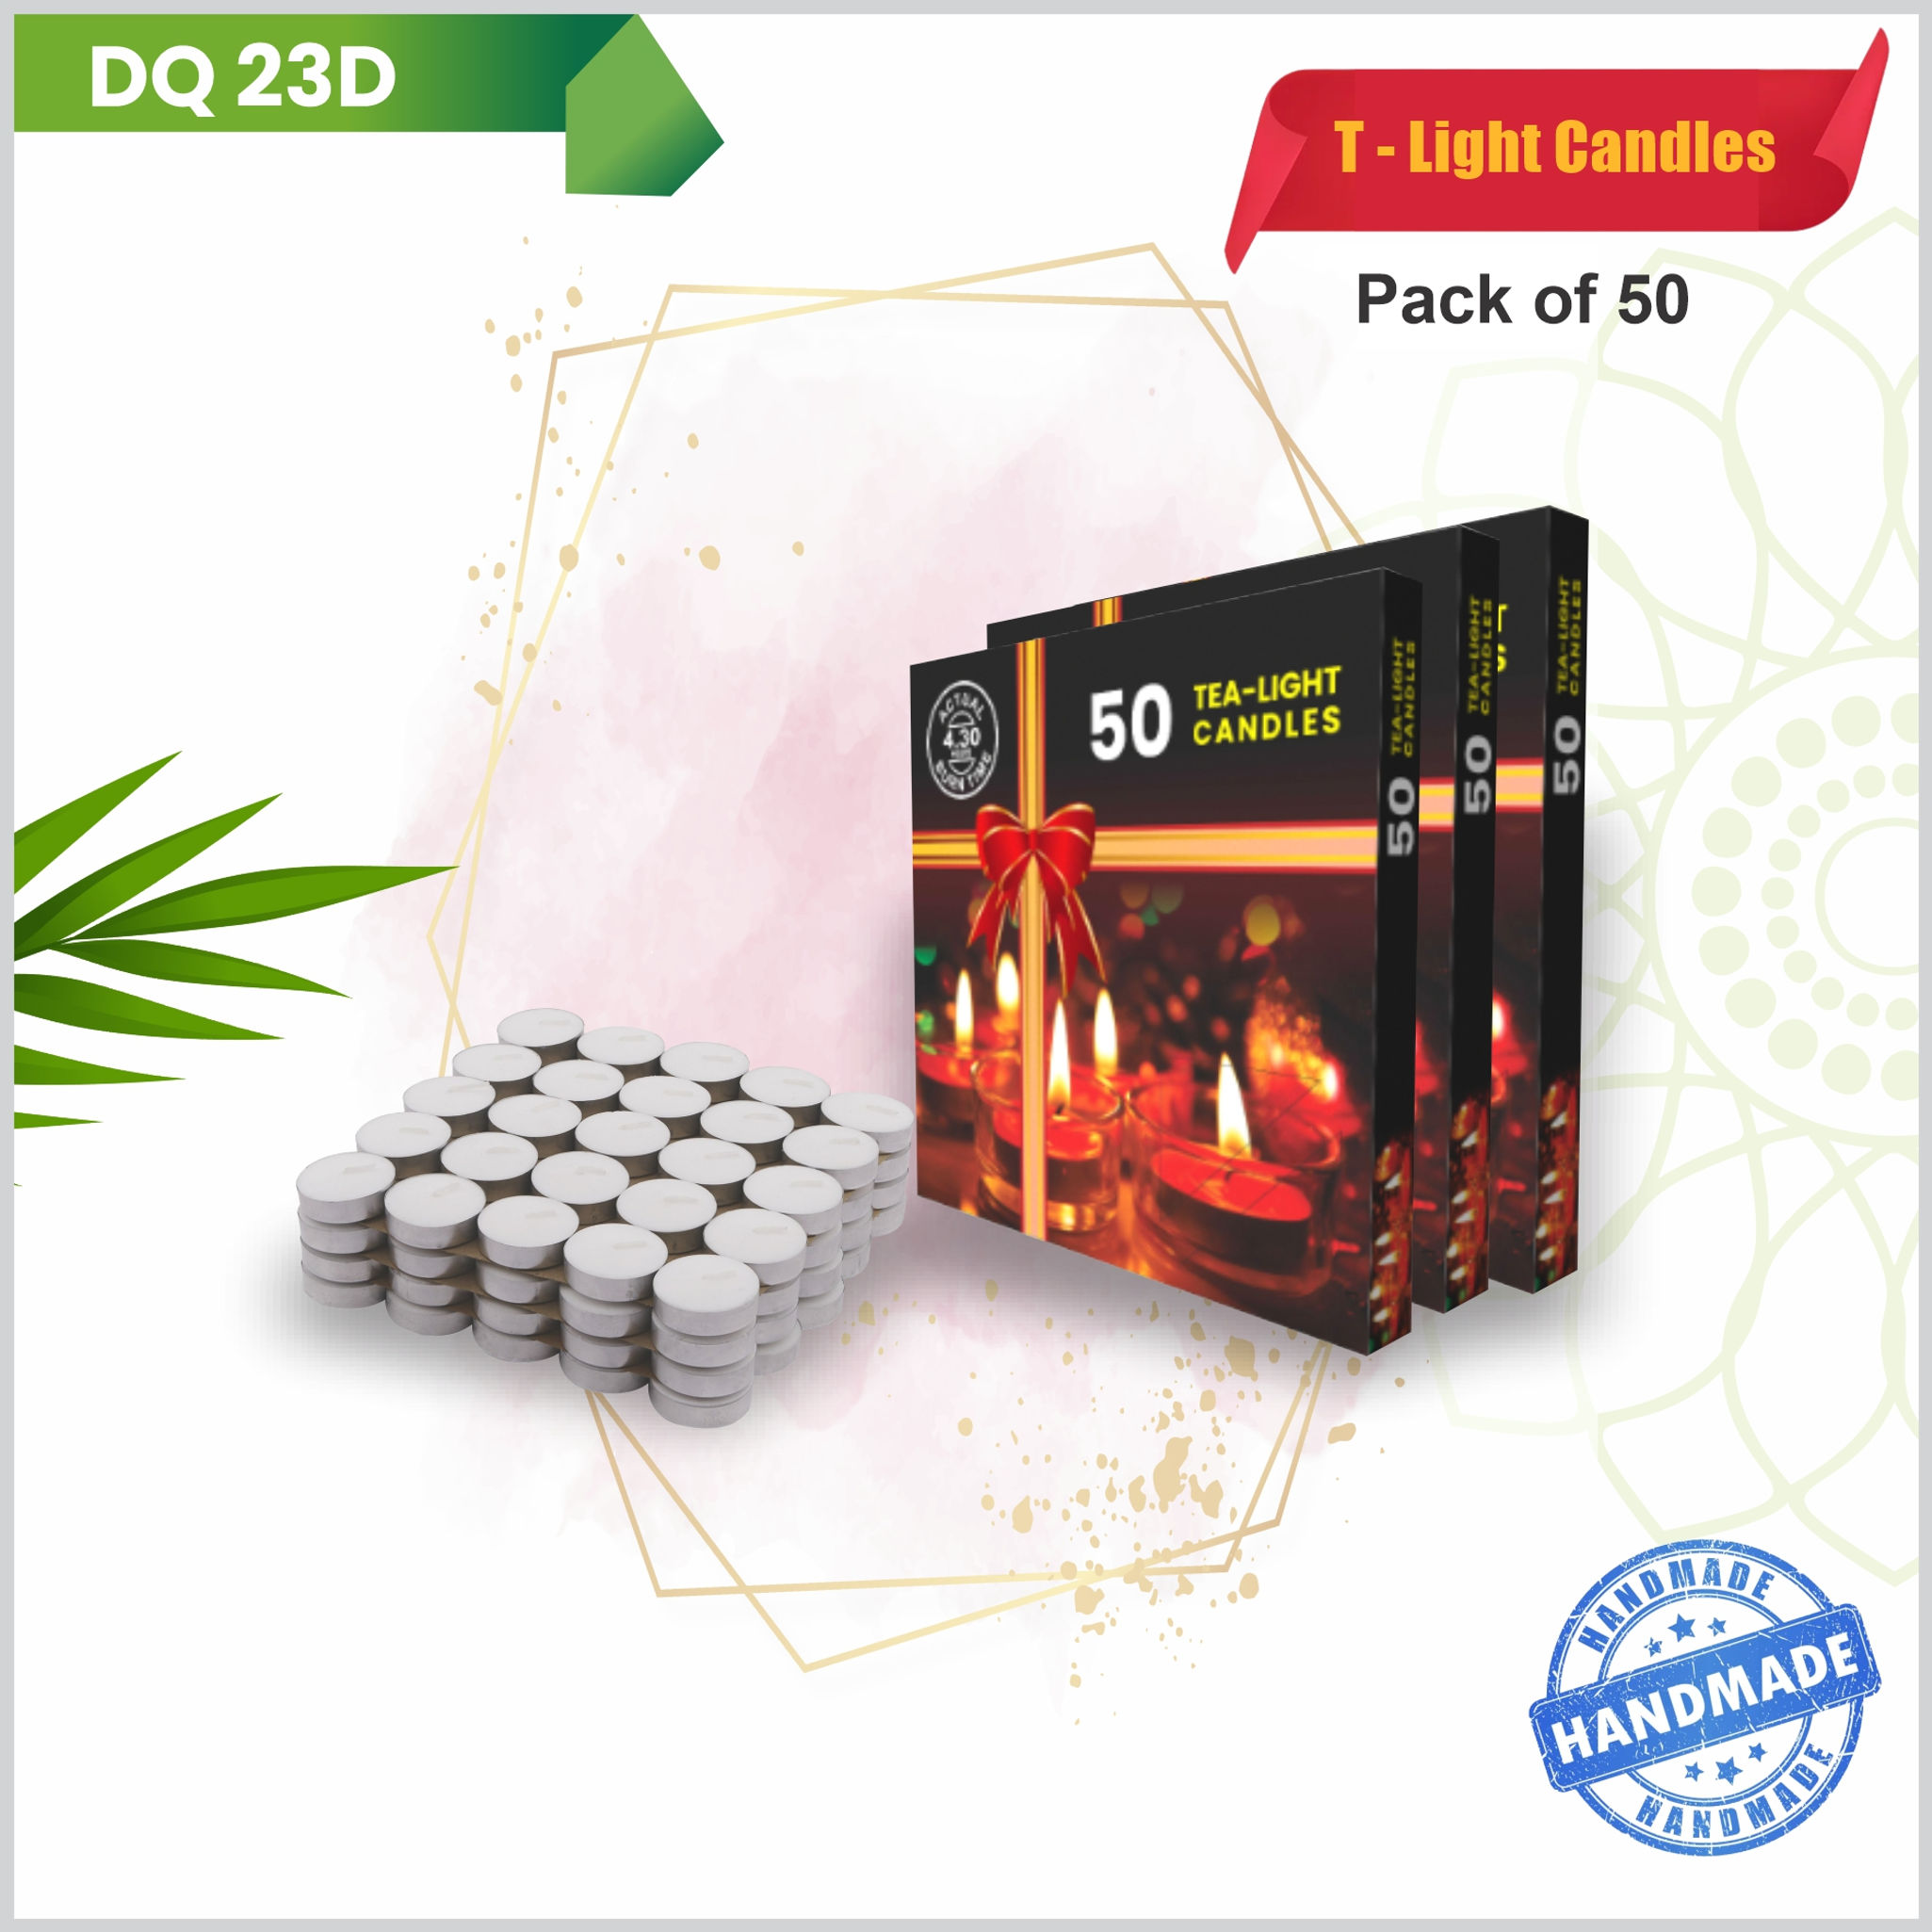 T-Light Candles Pack of 50|Festive Products|Diwali